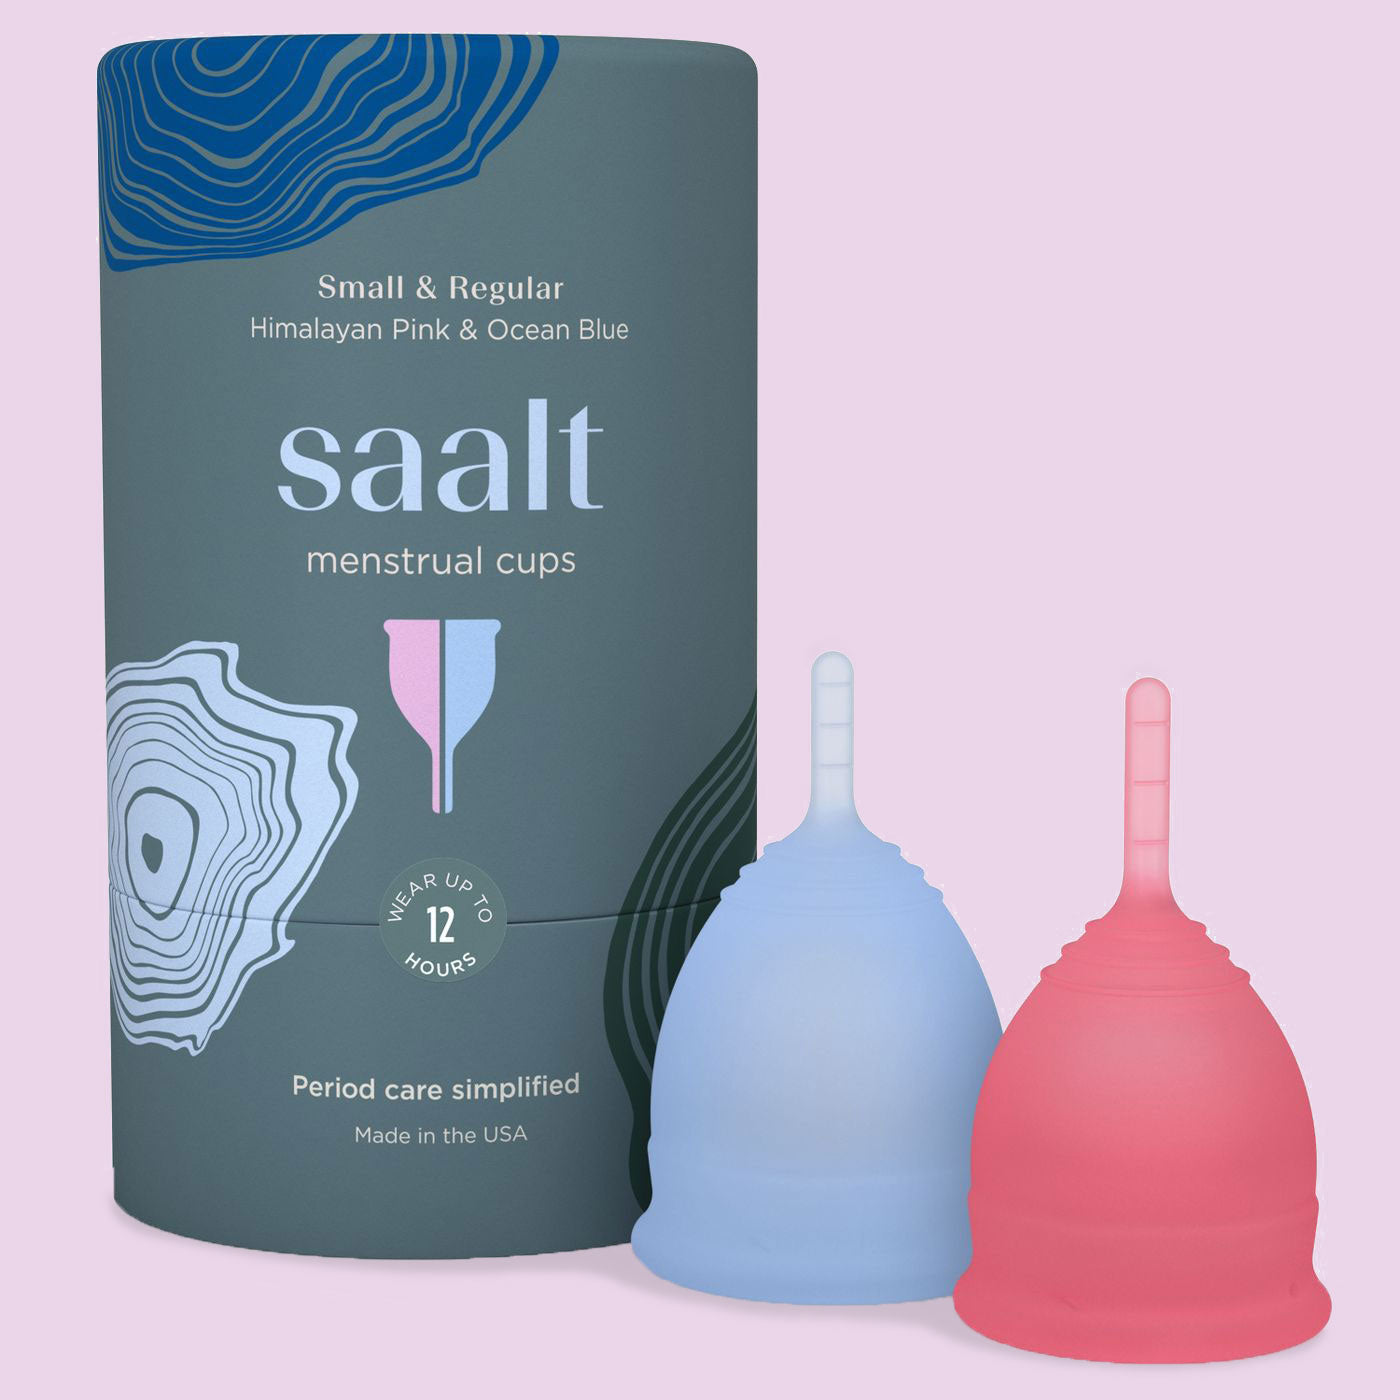 Saalt Duo Small and Regular cups with packaging 